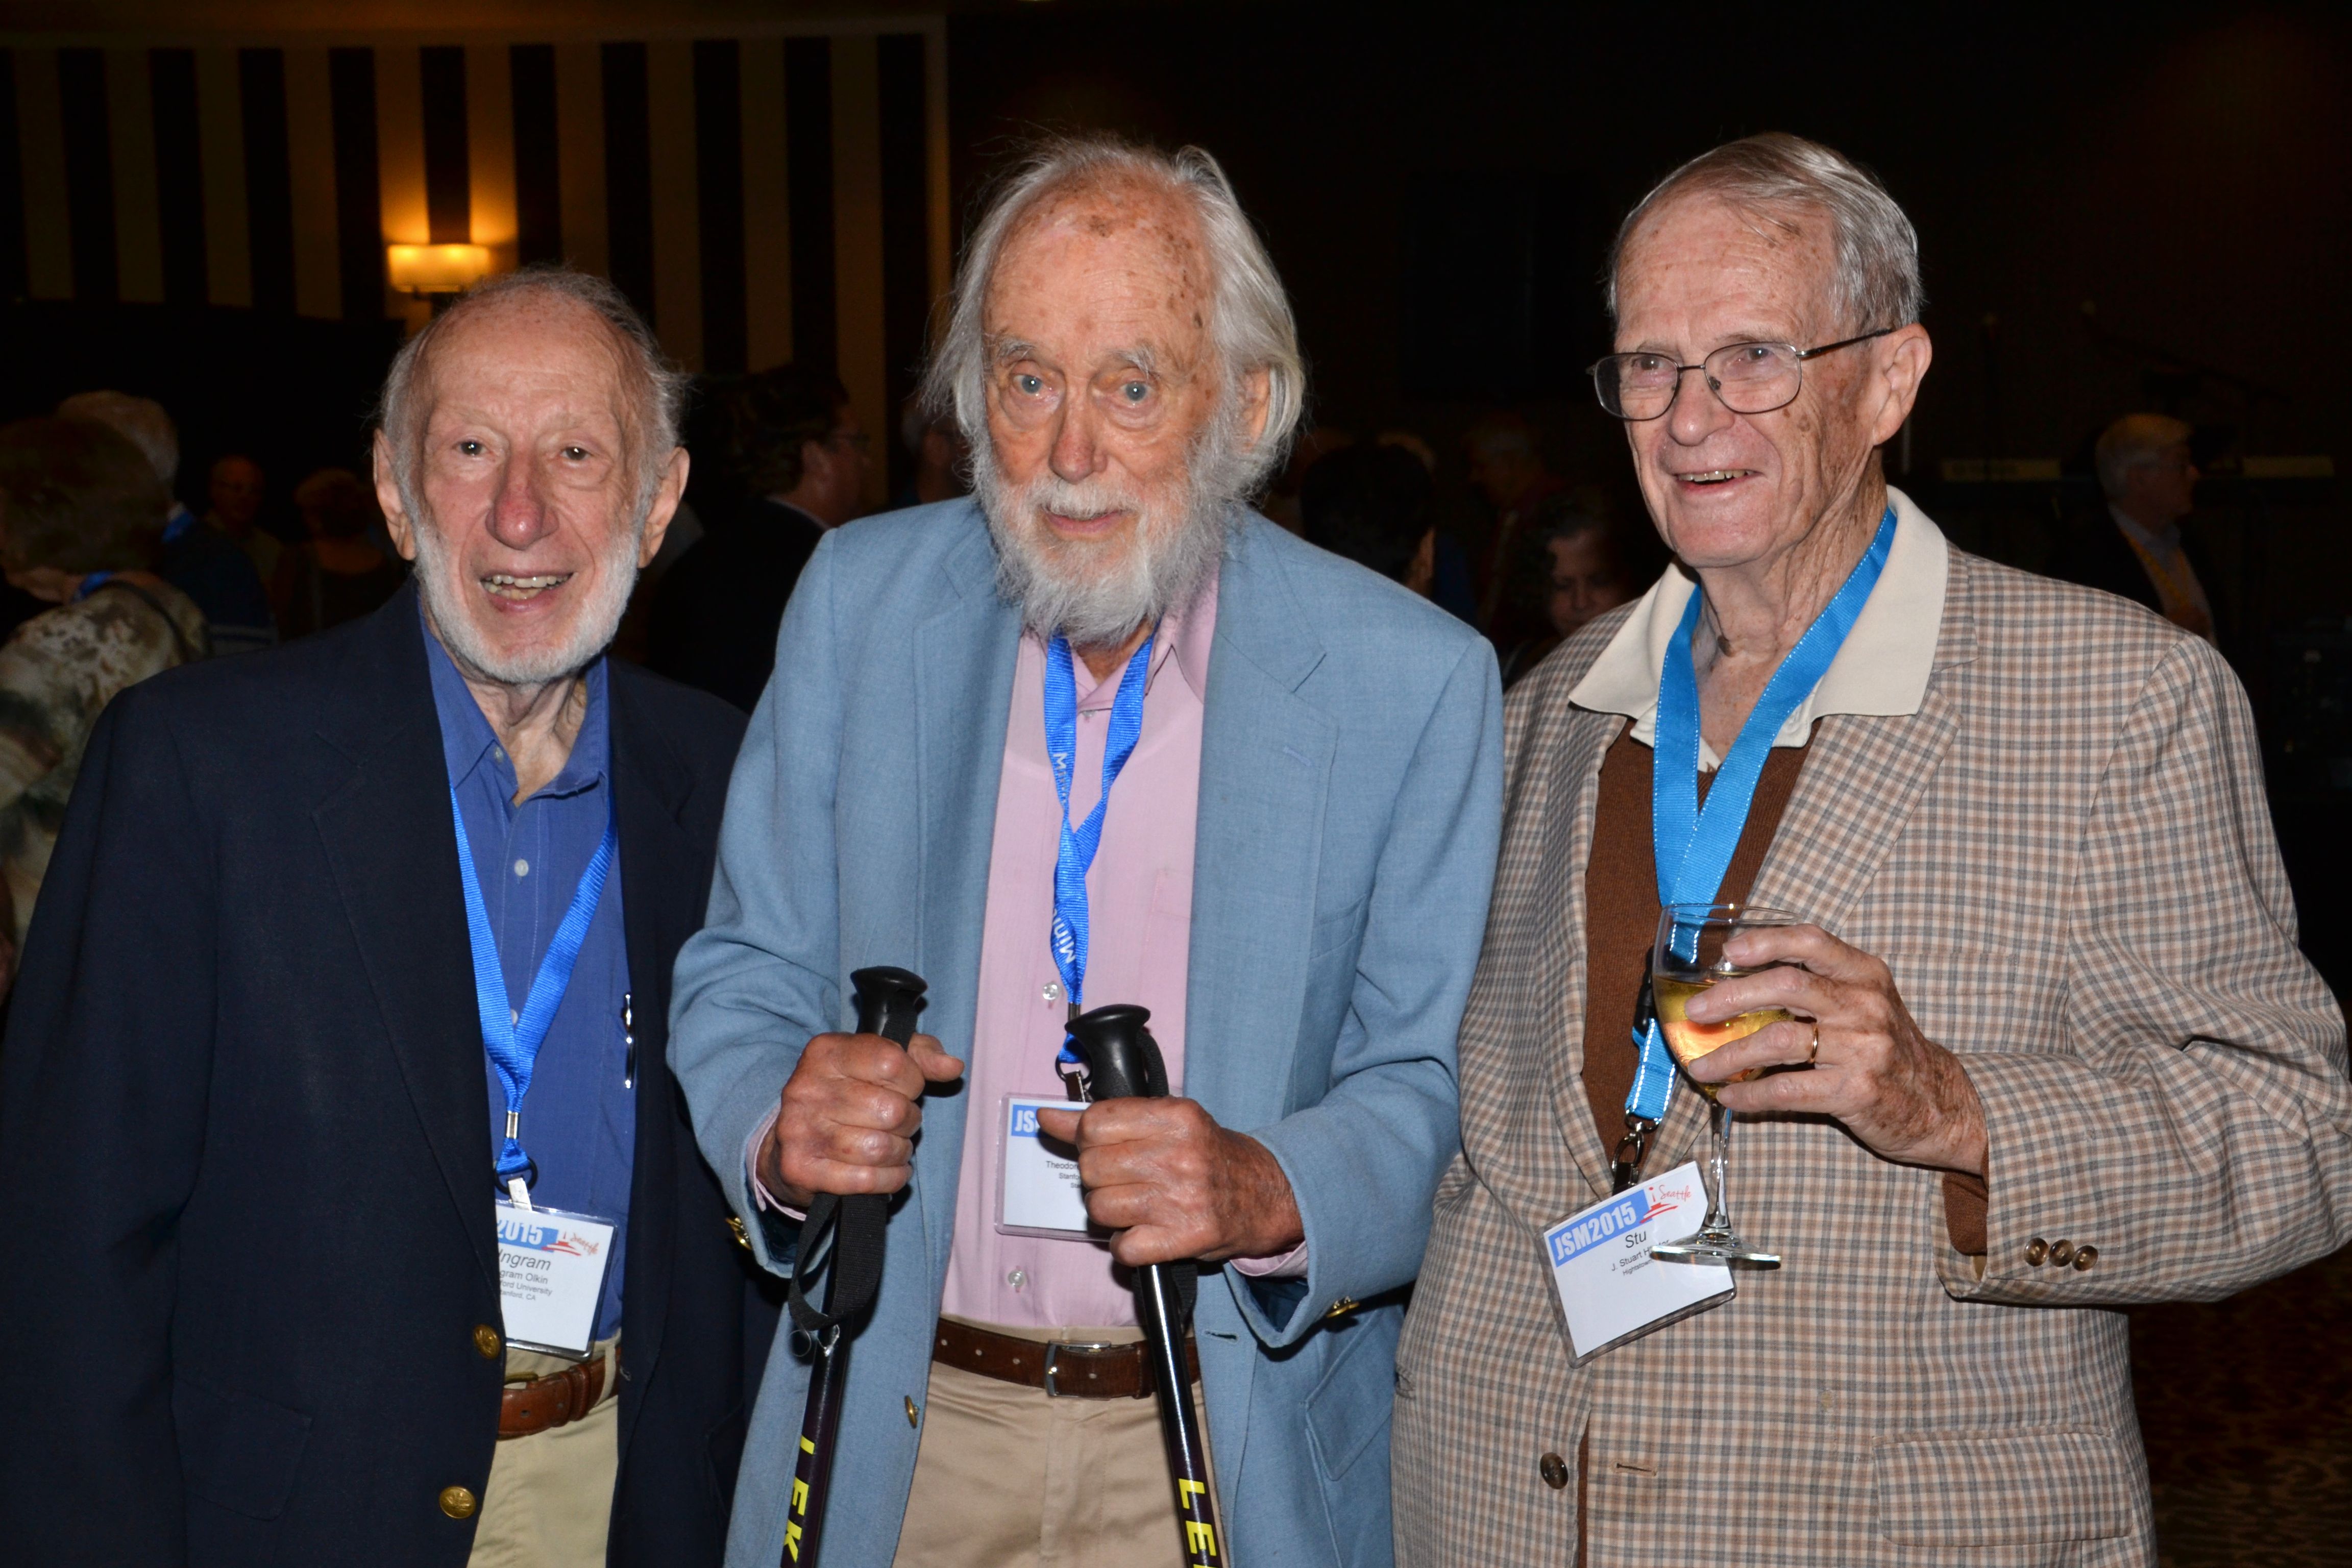 Ingram Olkin, Ted Anderson, and Stu Hunter attend the Longtime Member Reception. 